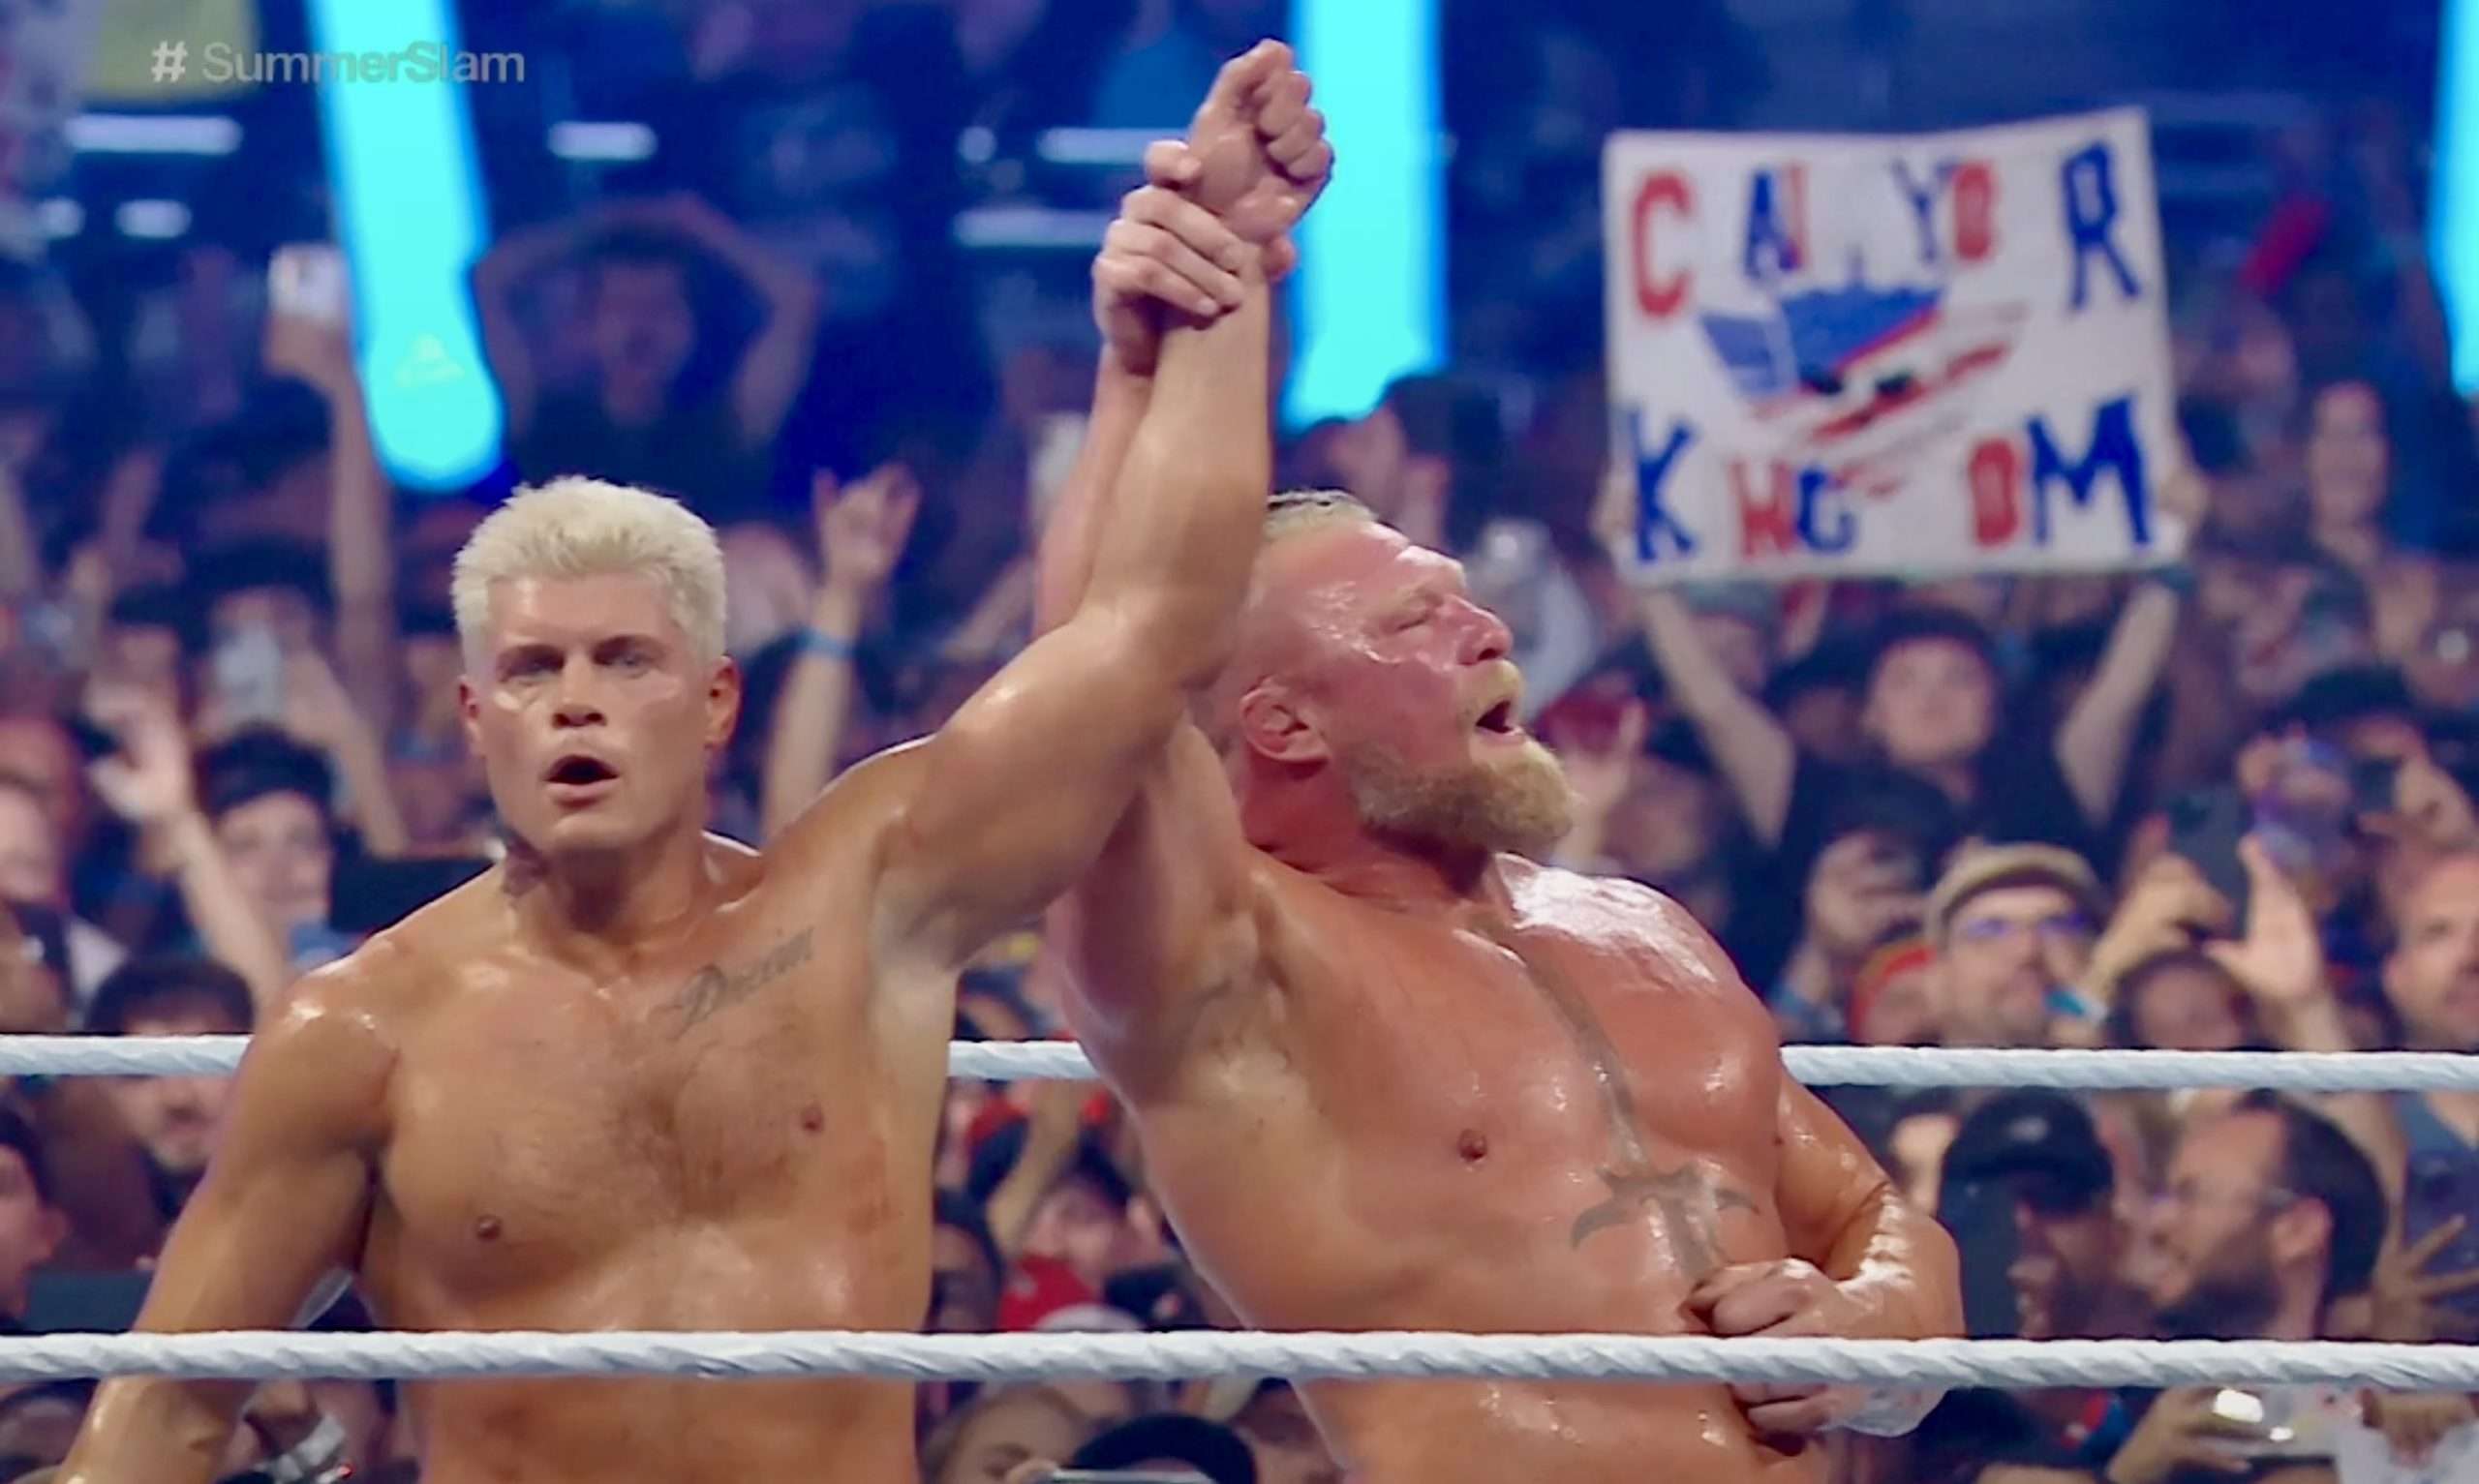 Cody Rhodes ‘ends the saga’ with win over Lesnar at SummerSlam, gets